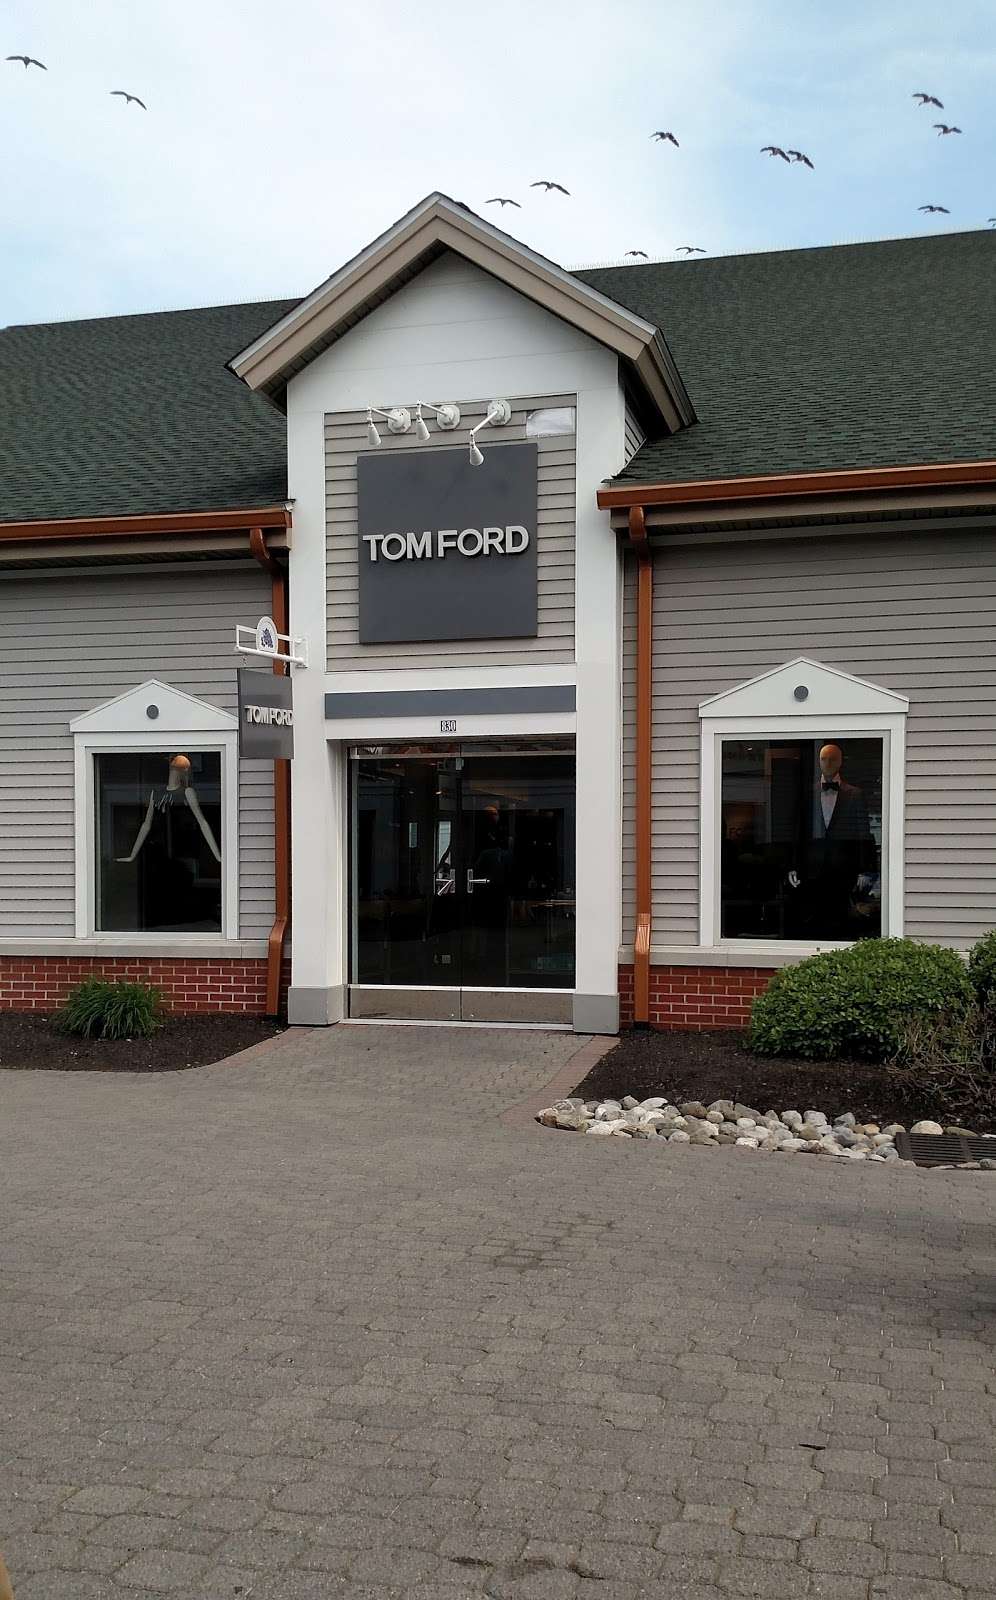 Tom Ford's - 6619, 498 Red Apple Ct, Central Valley, NY 10917